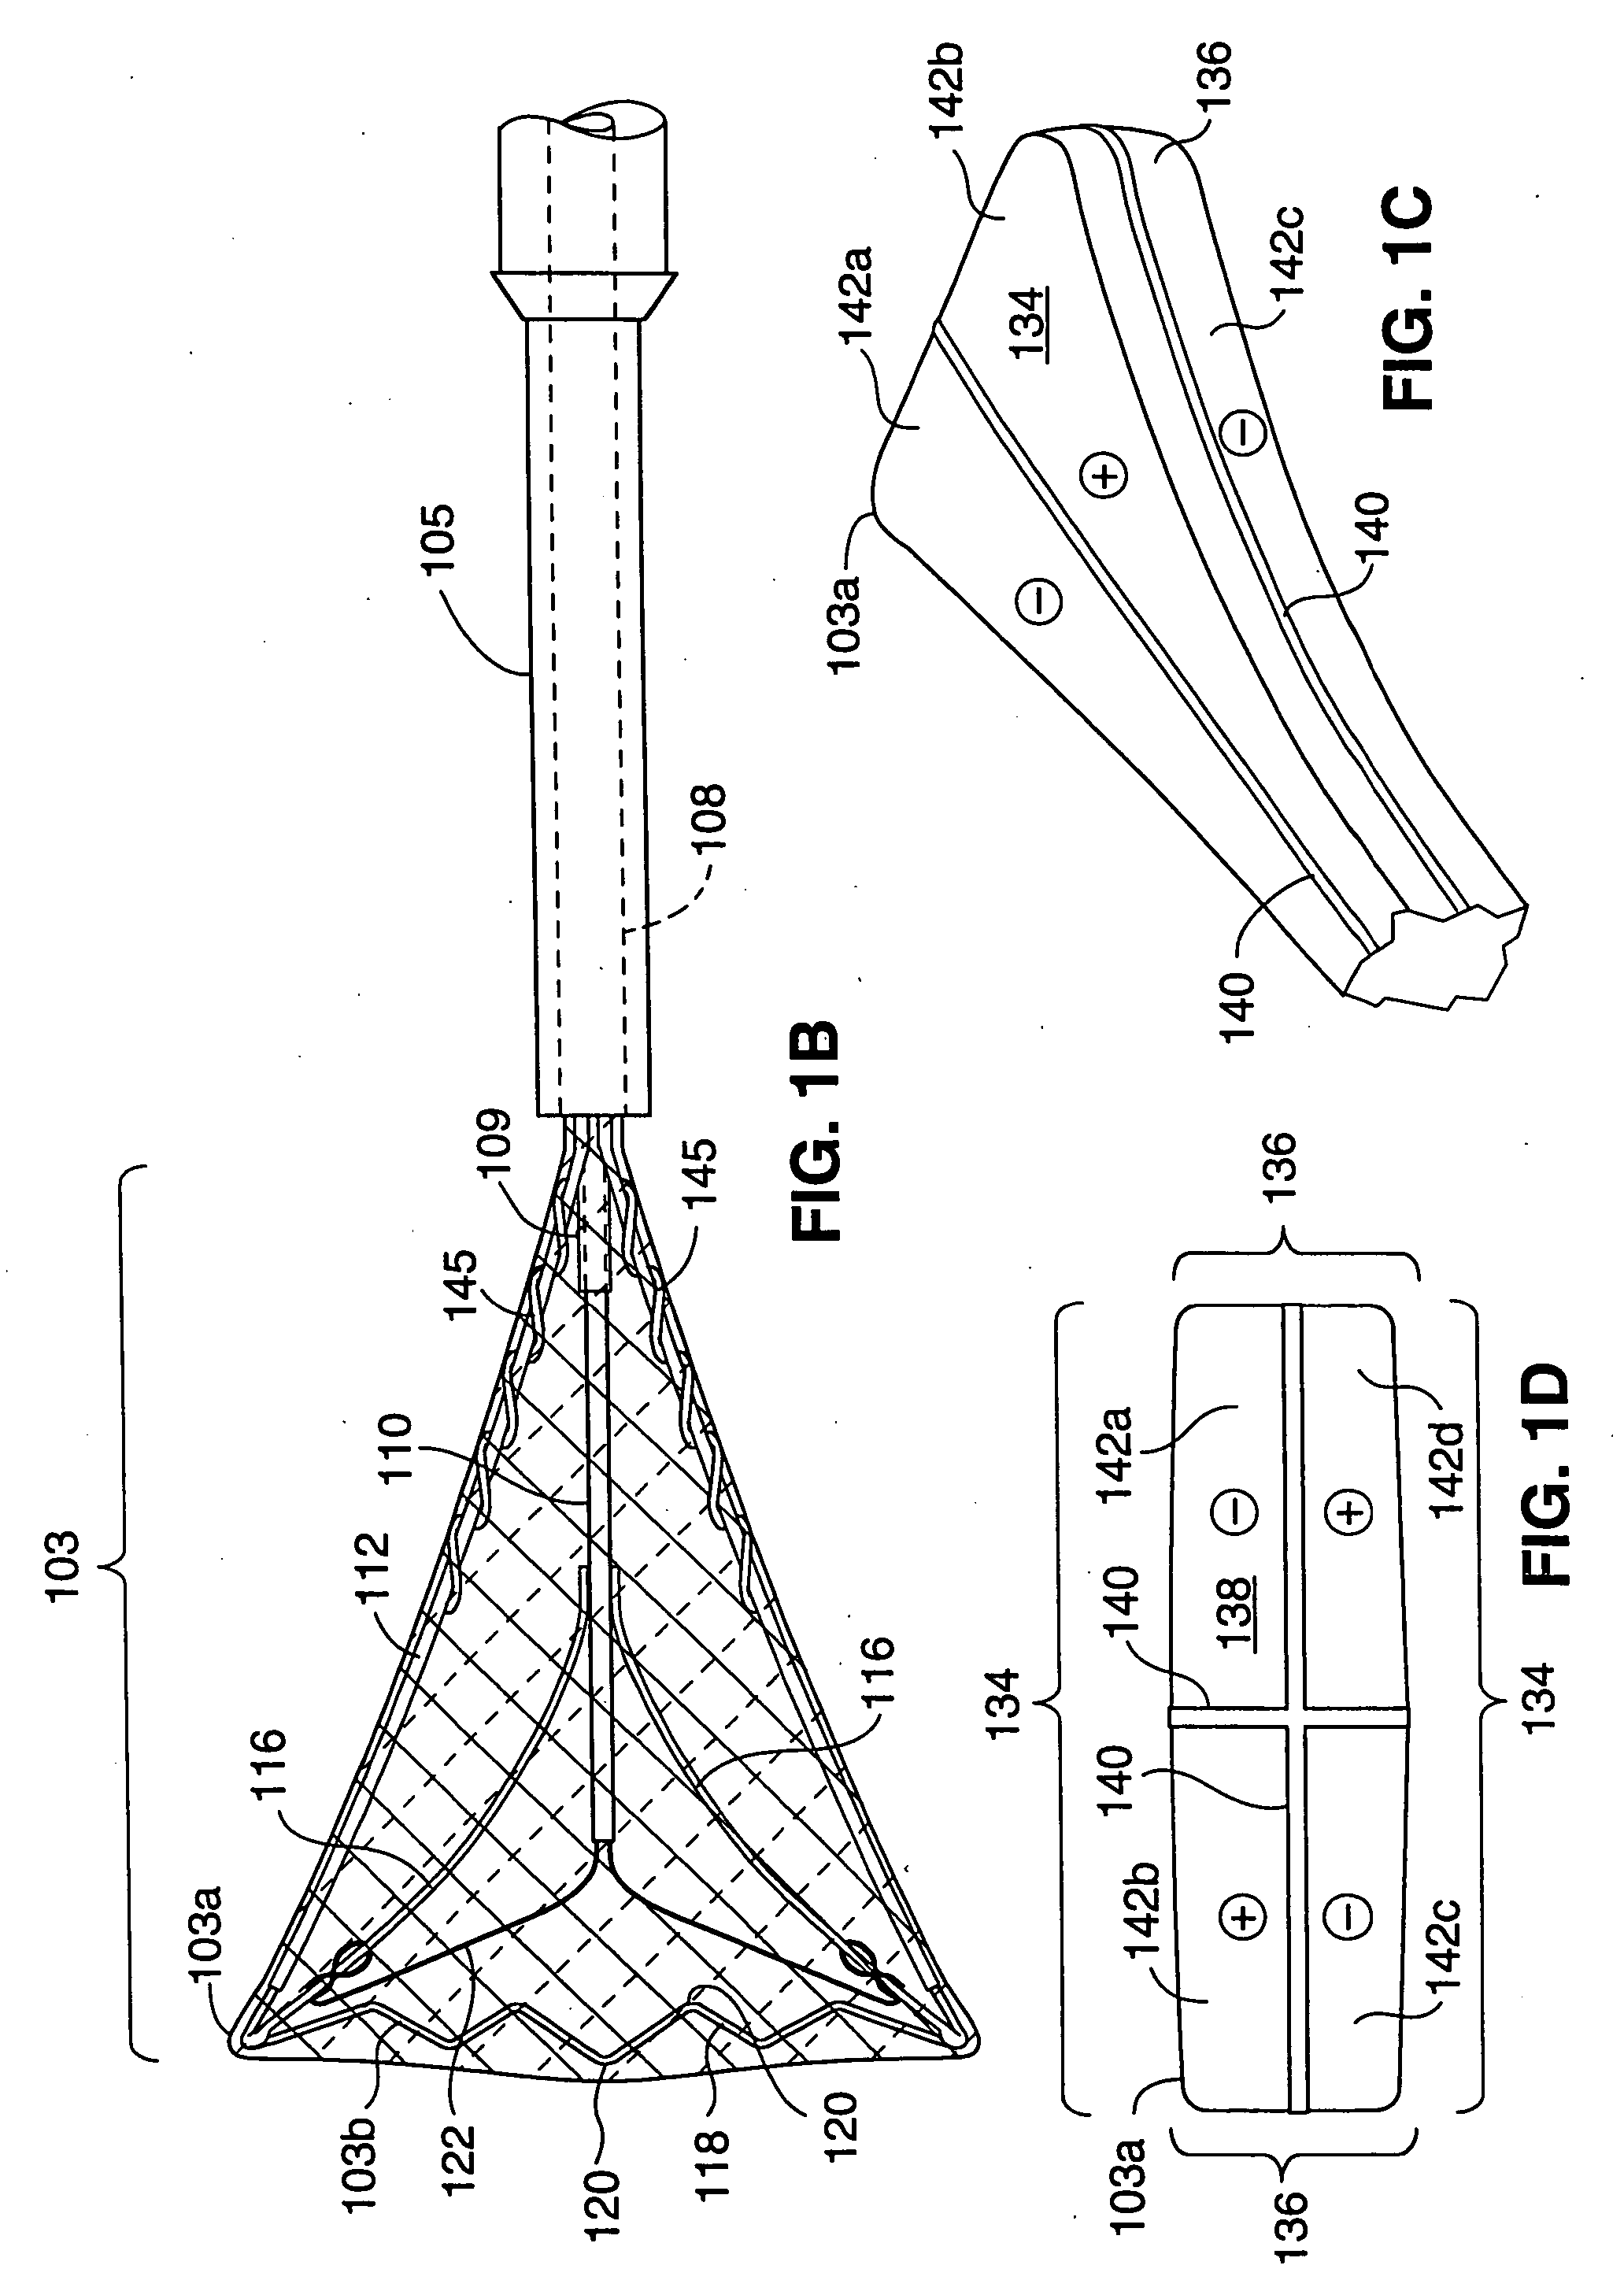 Radio-frequency generator for powering an ablation device